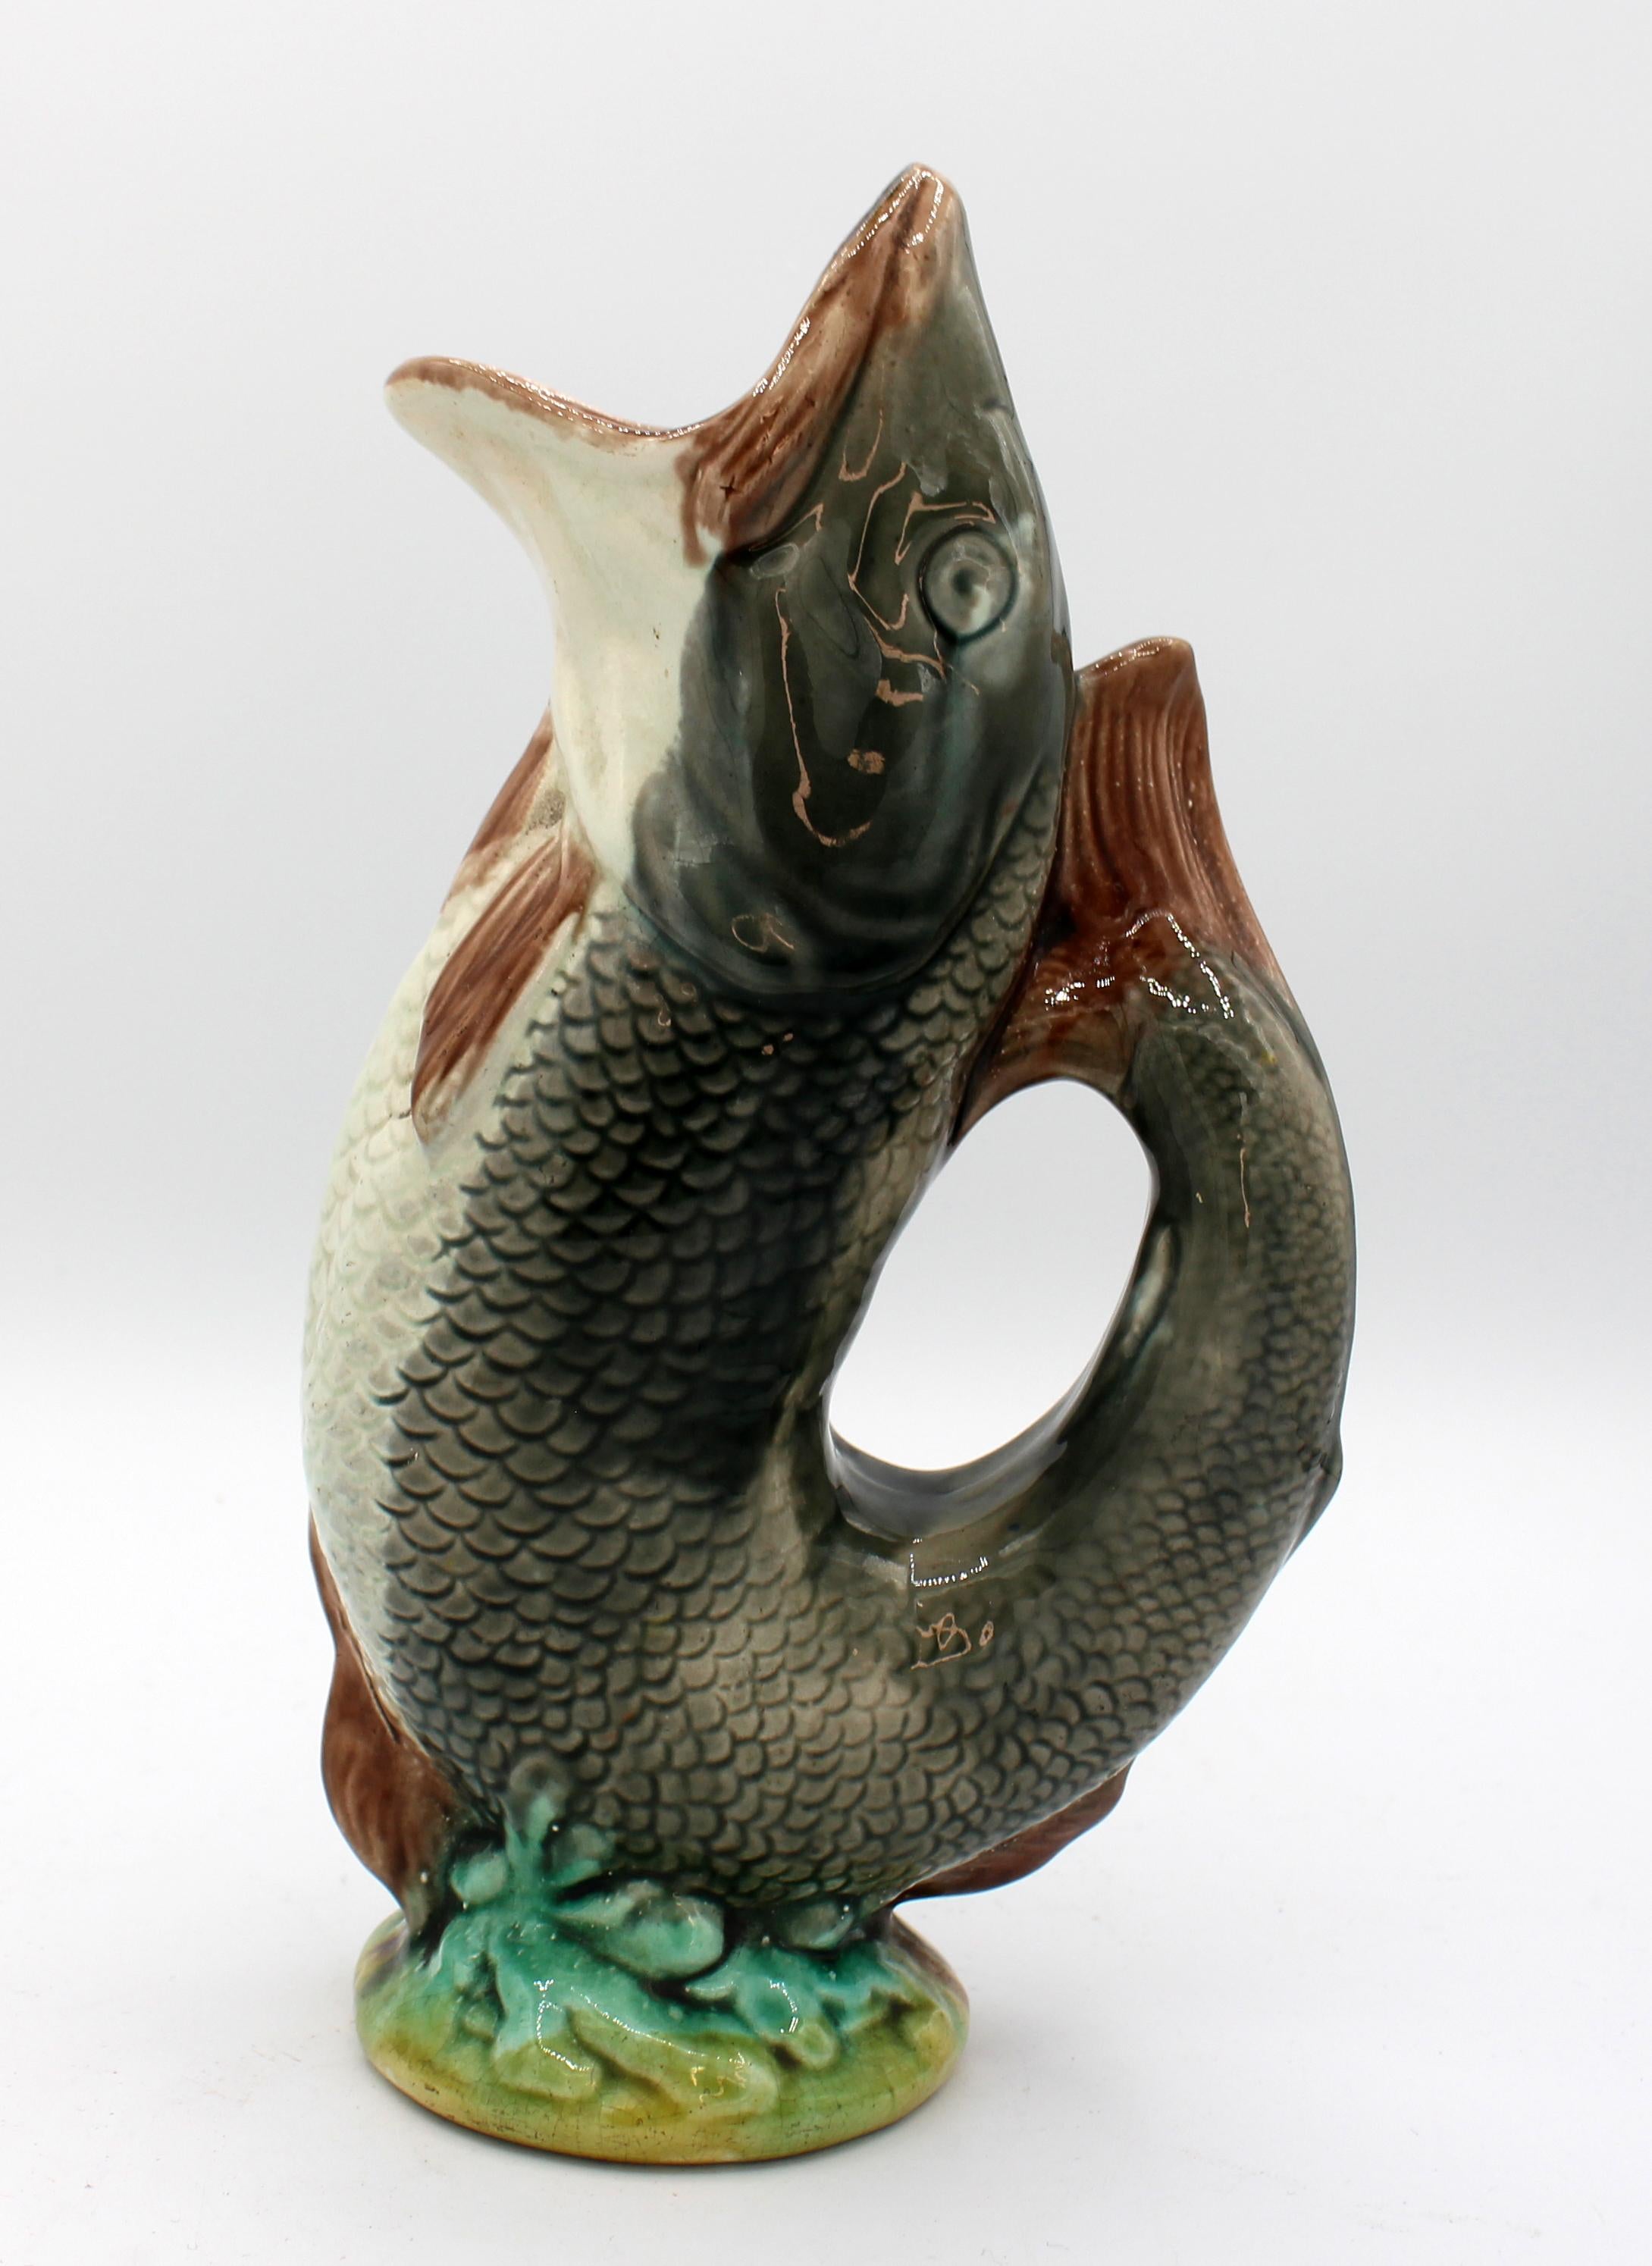 English majolica gurgling trout jug, late 19th century. Particularly well modelled & with good color. Unmarked.
Measures: 10 7/8